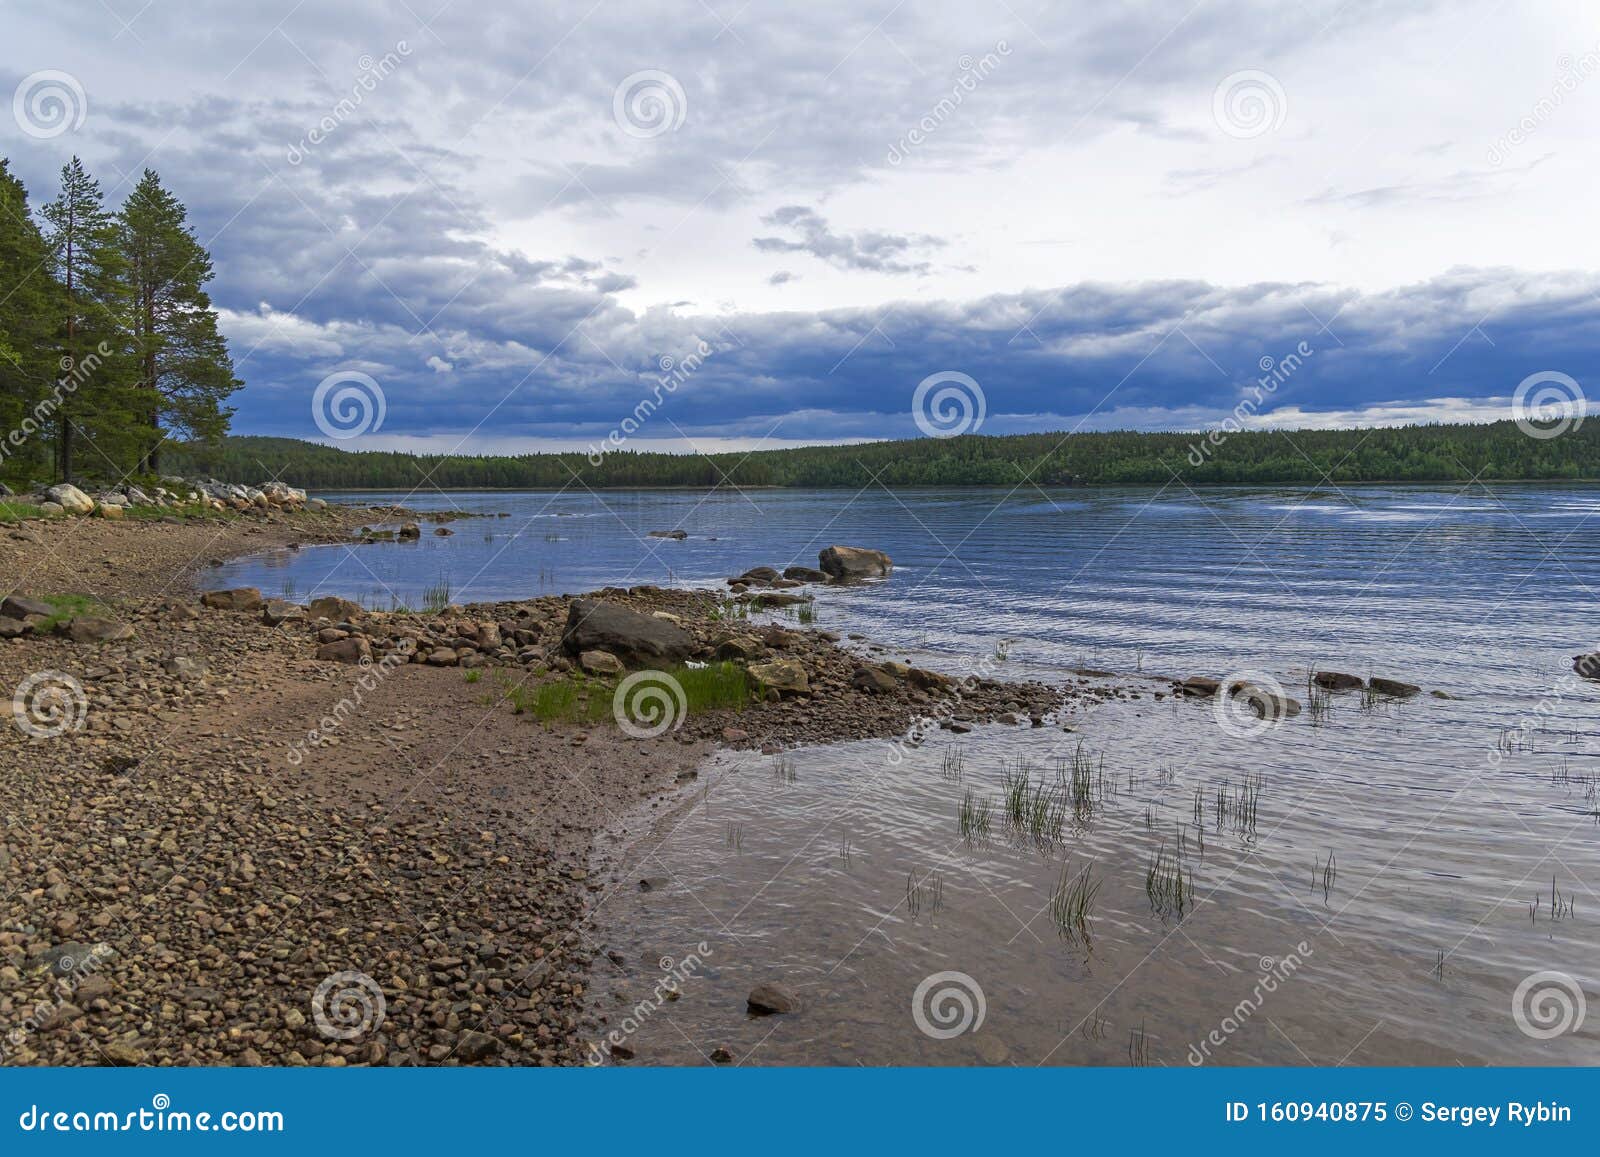 The Littoral Zone At Low Tide Stock Image Image Of Littoral Landscape